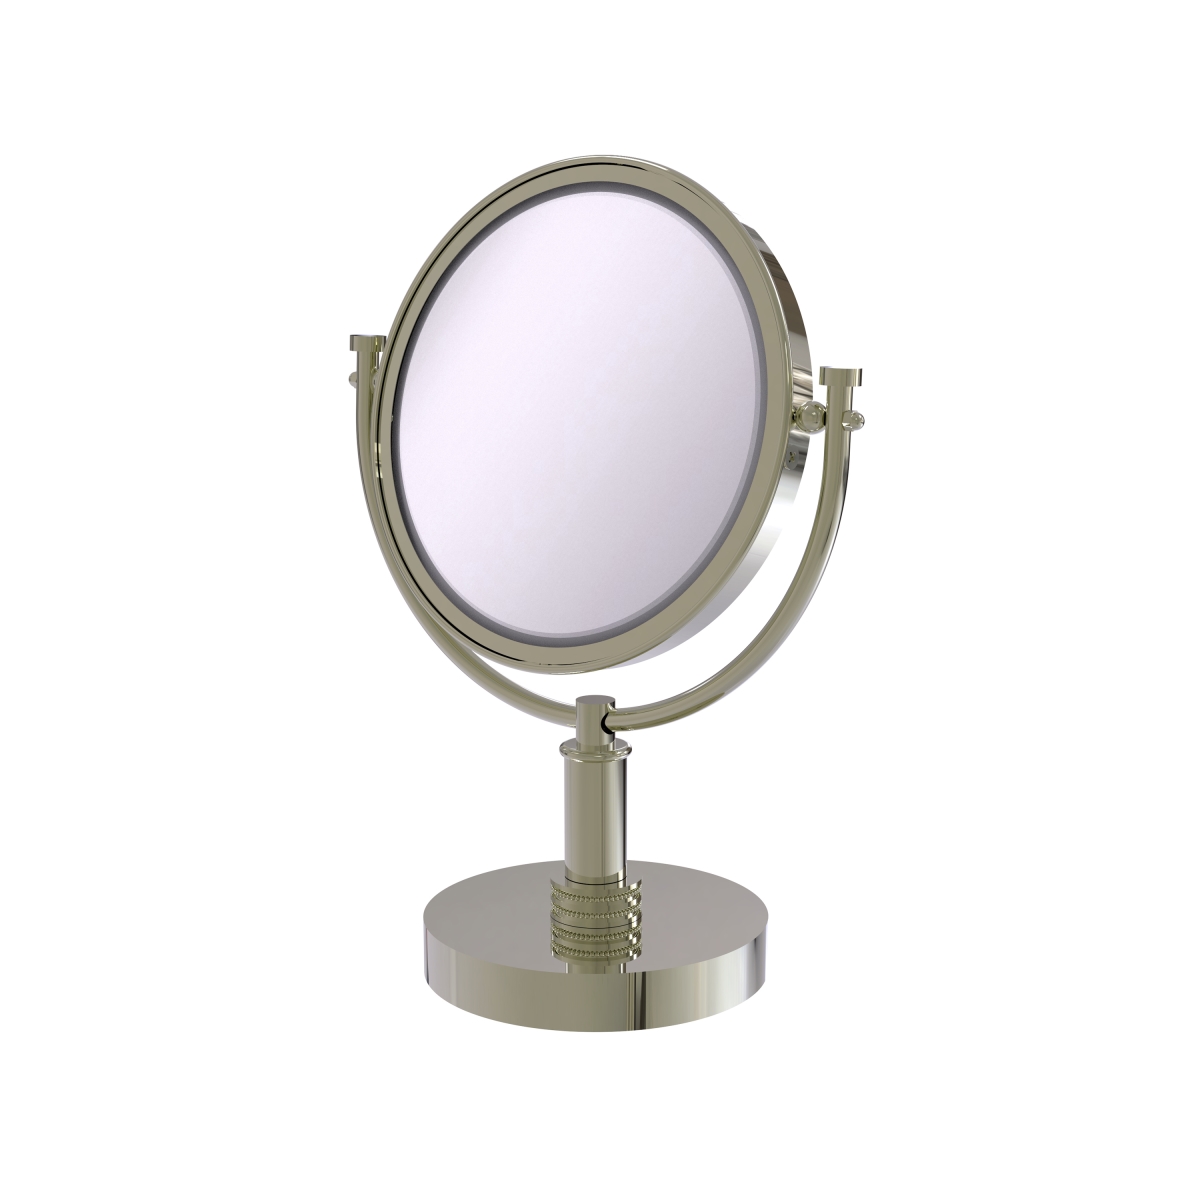 Picture of Allied Brass DM-4D-5X-PNI 8 in. Vanity Top Make-Up Mirror 5X Magnification, Polished Nickel - 15 x 8 x 8 in.